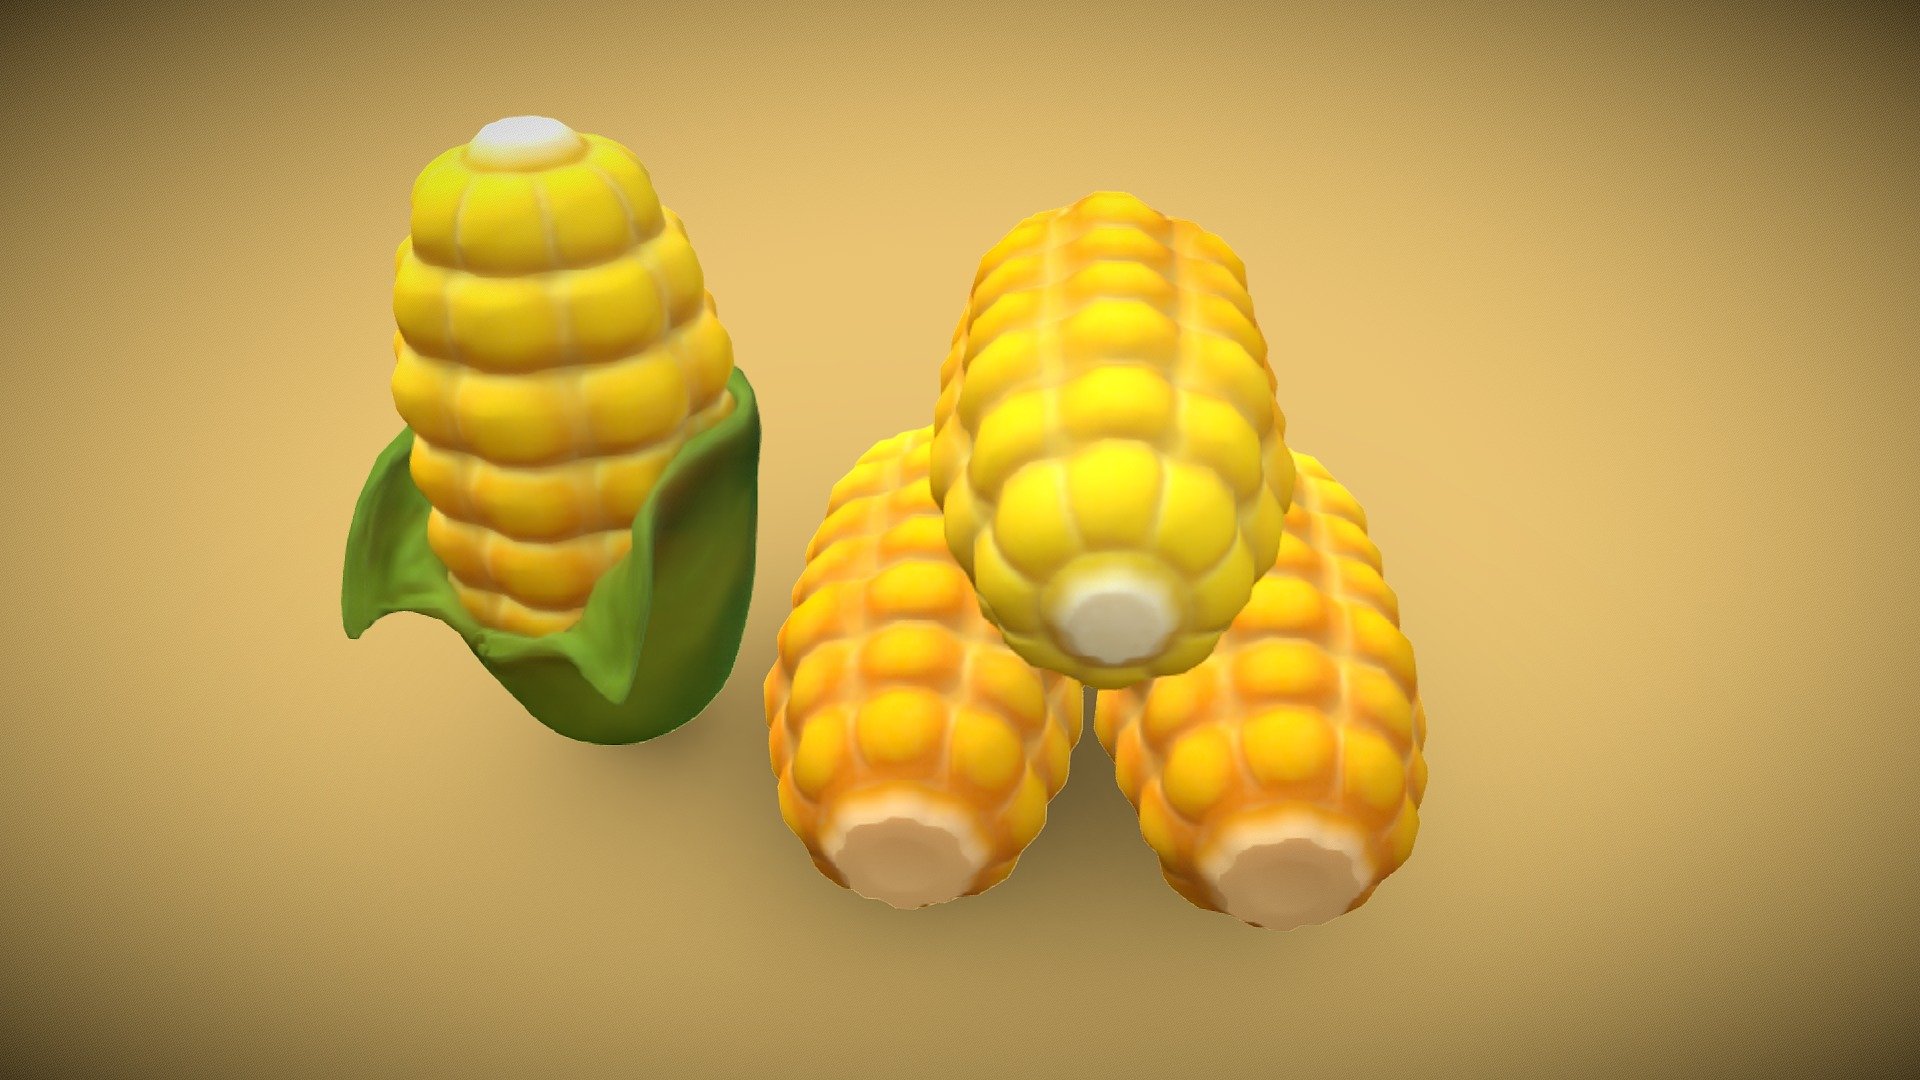 Made in 3DS Max/Zbrush and texture in Substance Painter/Photoshop.

One single corn has 1514 Polygons and the leaf mesh has 937 Polygons, so in total the corn mesh has 2451 Polygons.

Included maps:

• Diffuse

• Normals

• Roughness

• Ambient Occlusion

• Subsurfacing Scattering map 3d model